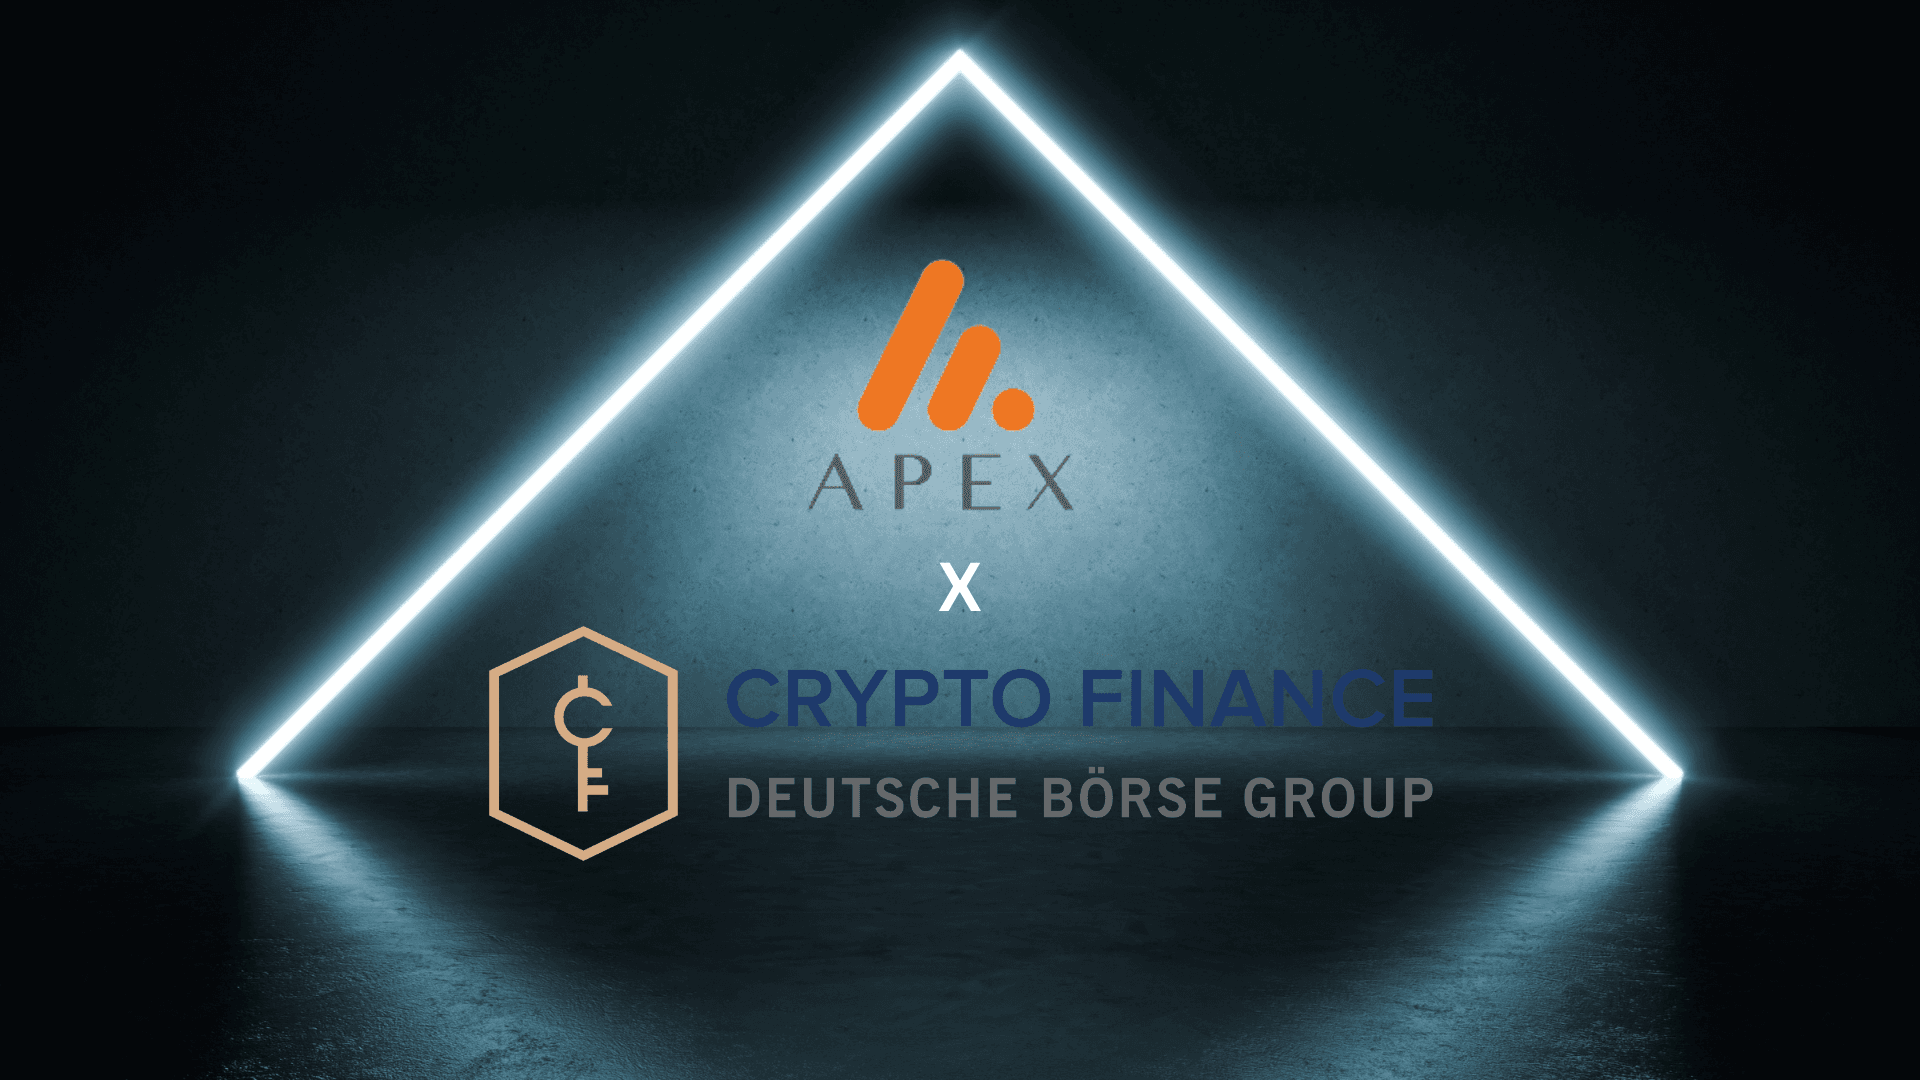 Apex Group Collaborates With Crypto Finance To Provide Better Crypto Investment Solutions